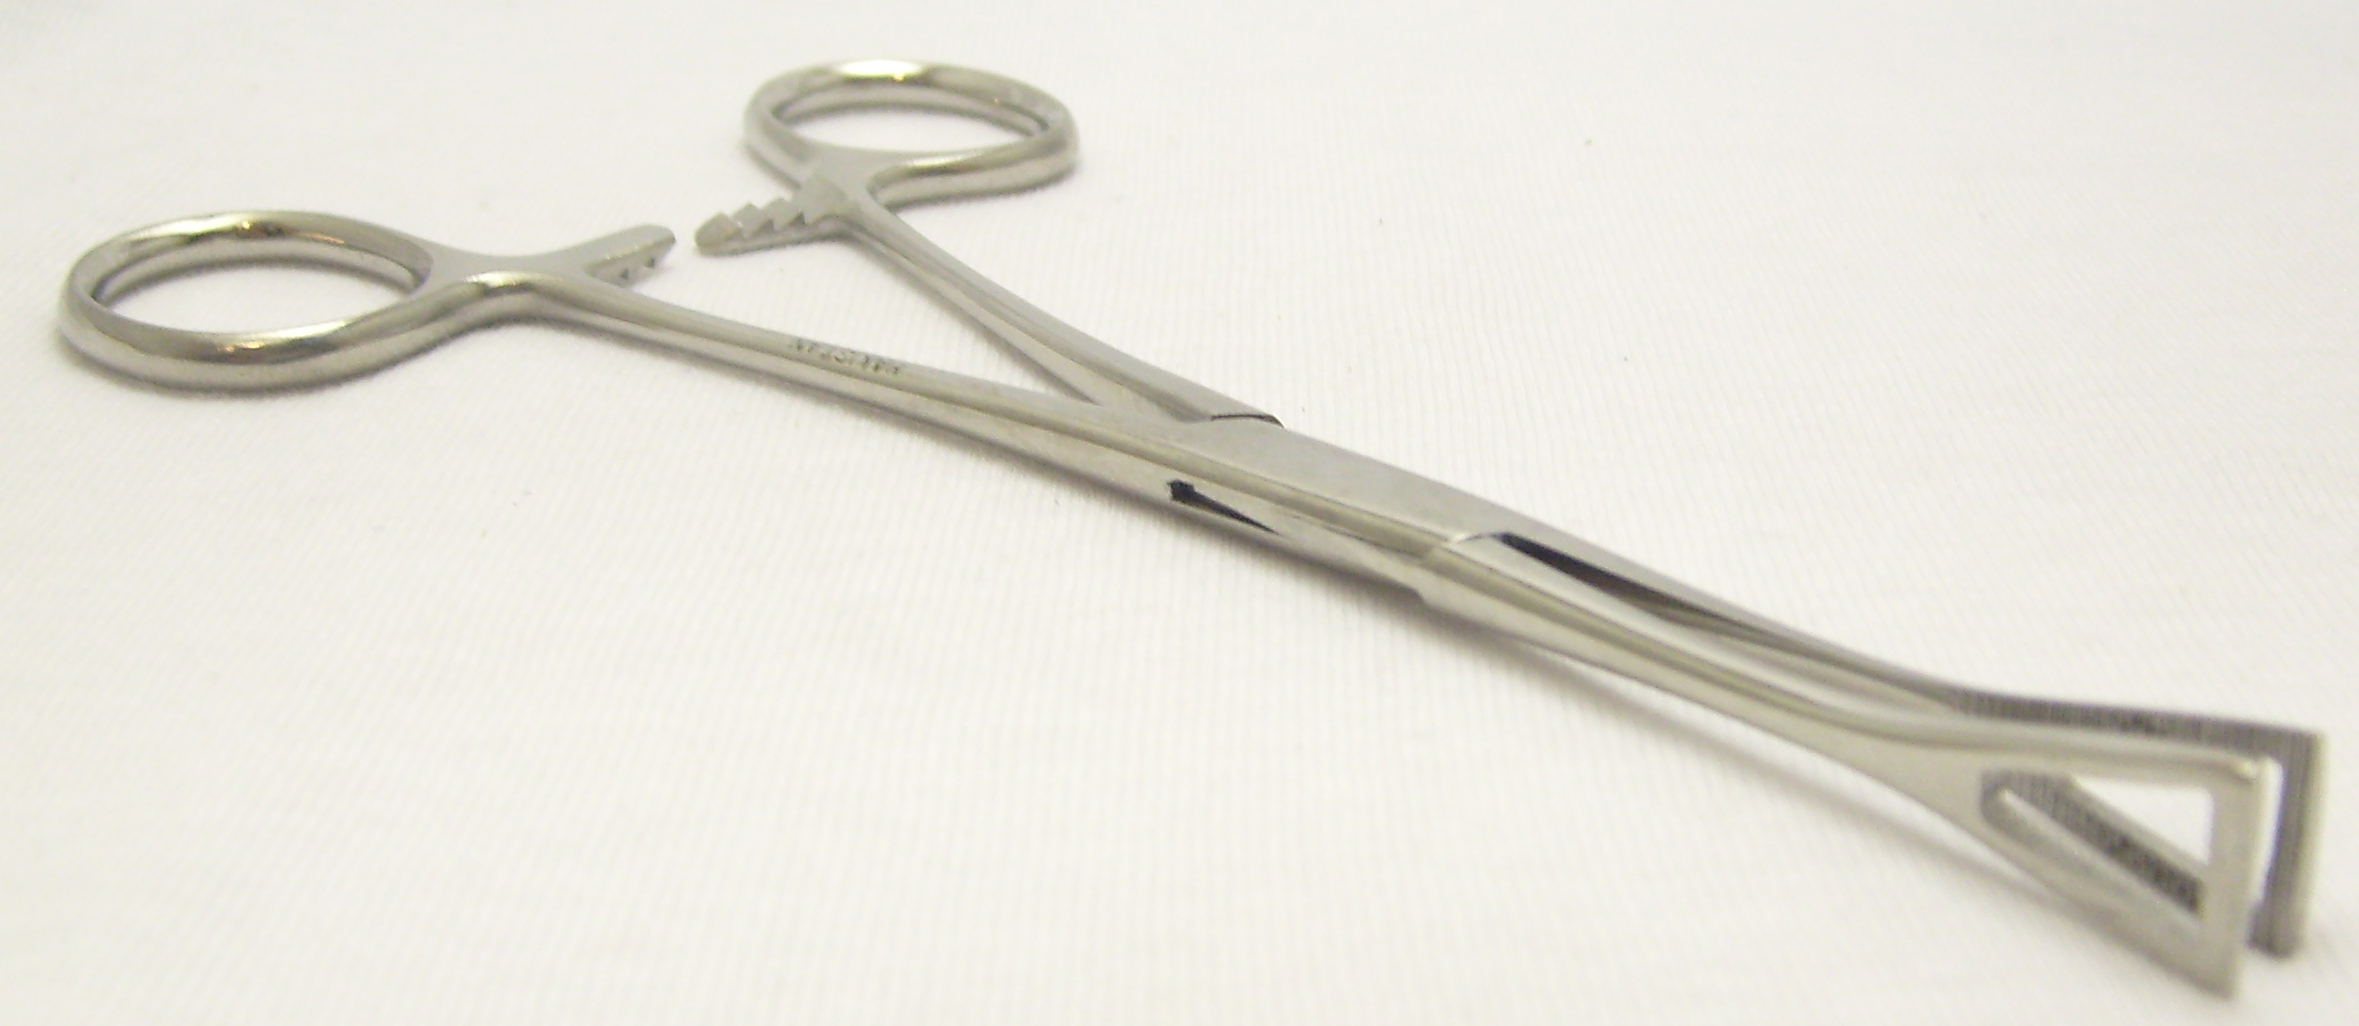 Large 6" Penningtons Forceps - Click Image to Close